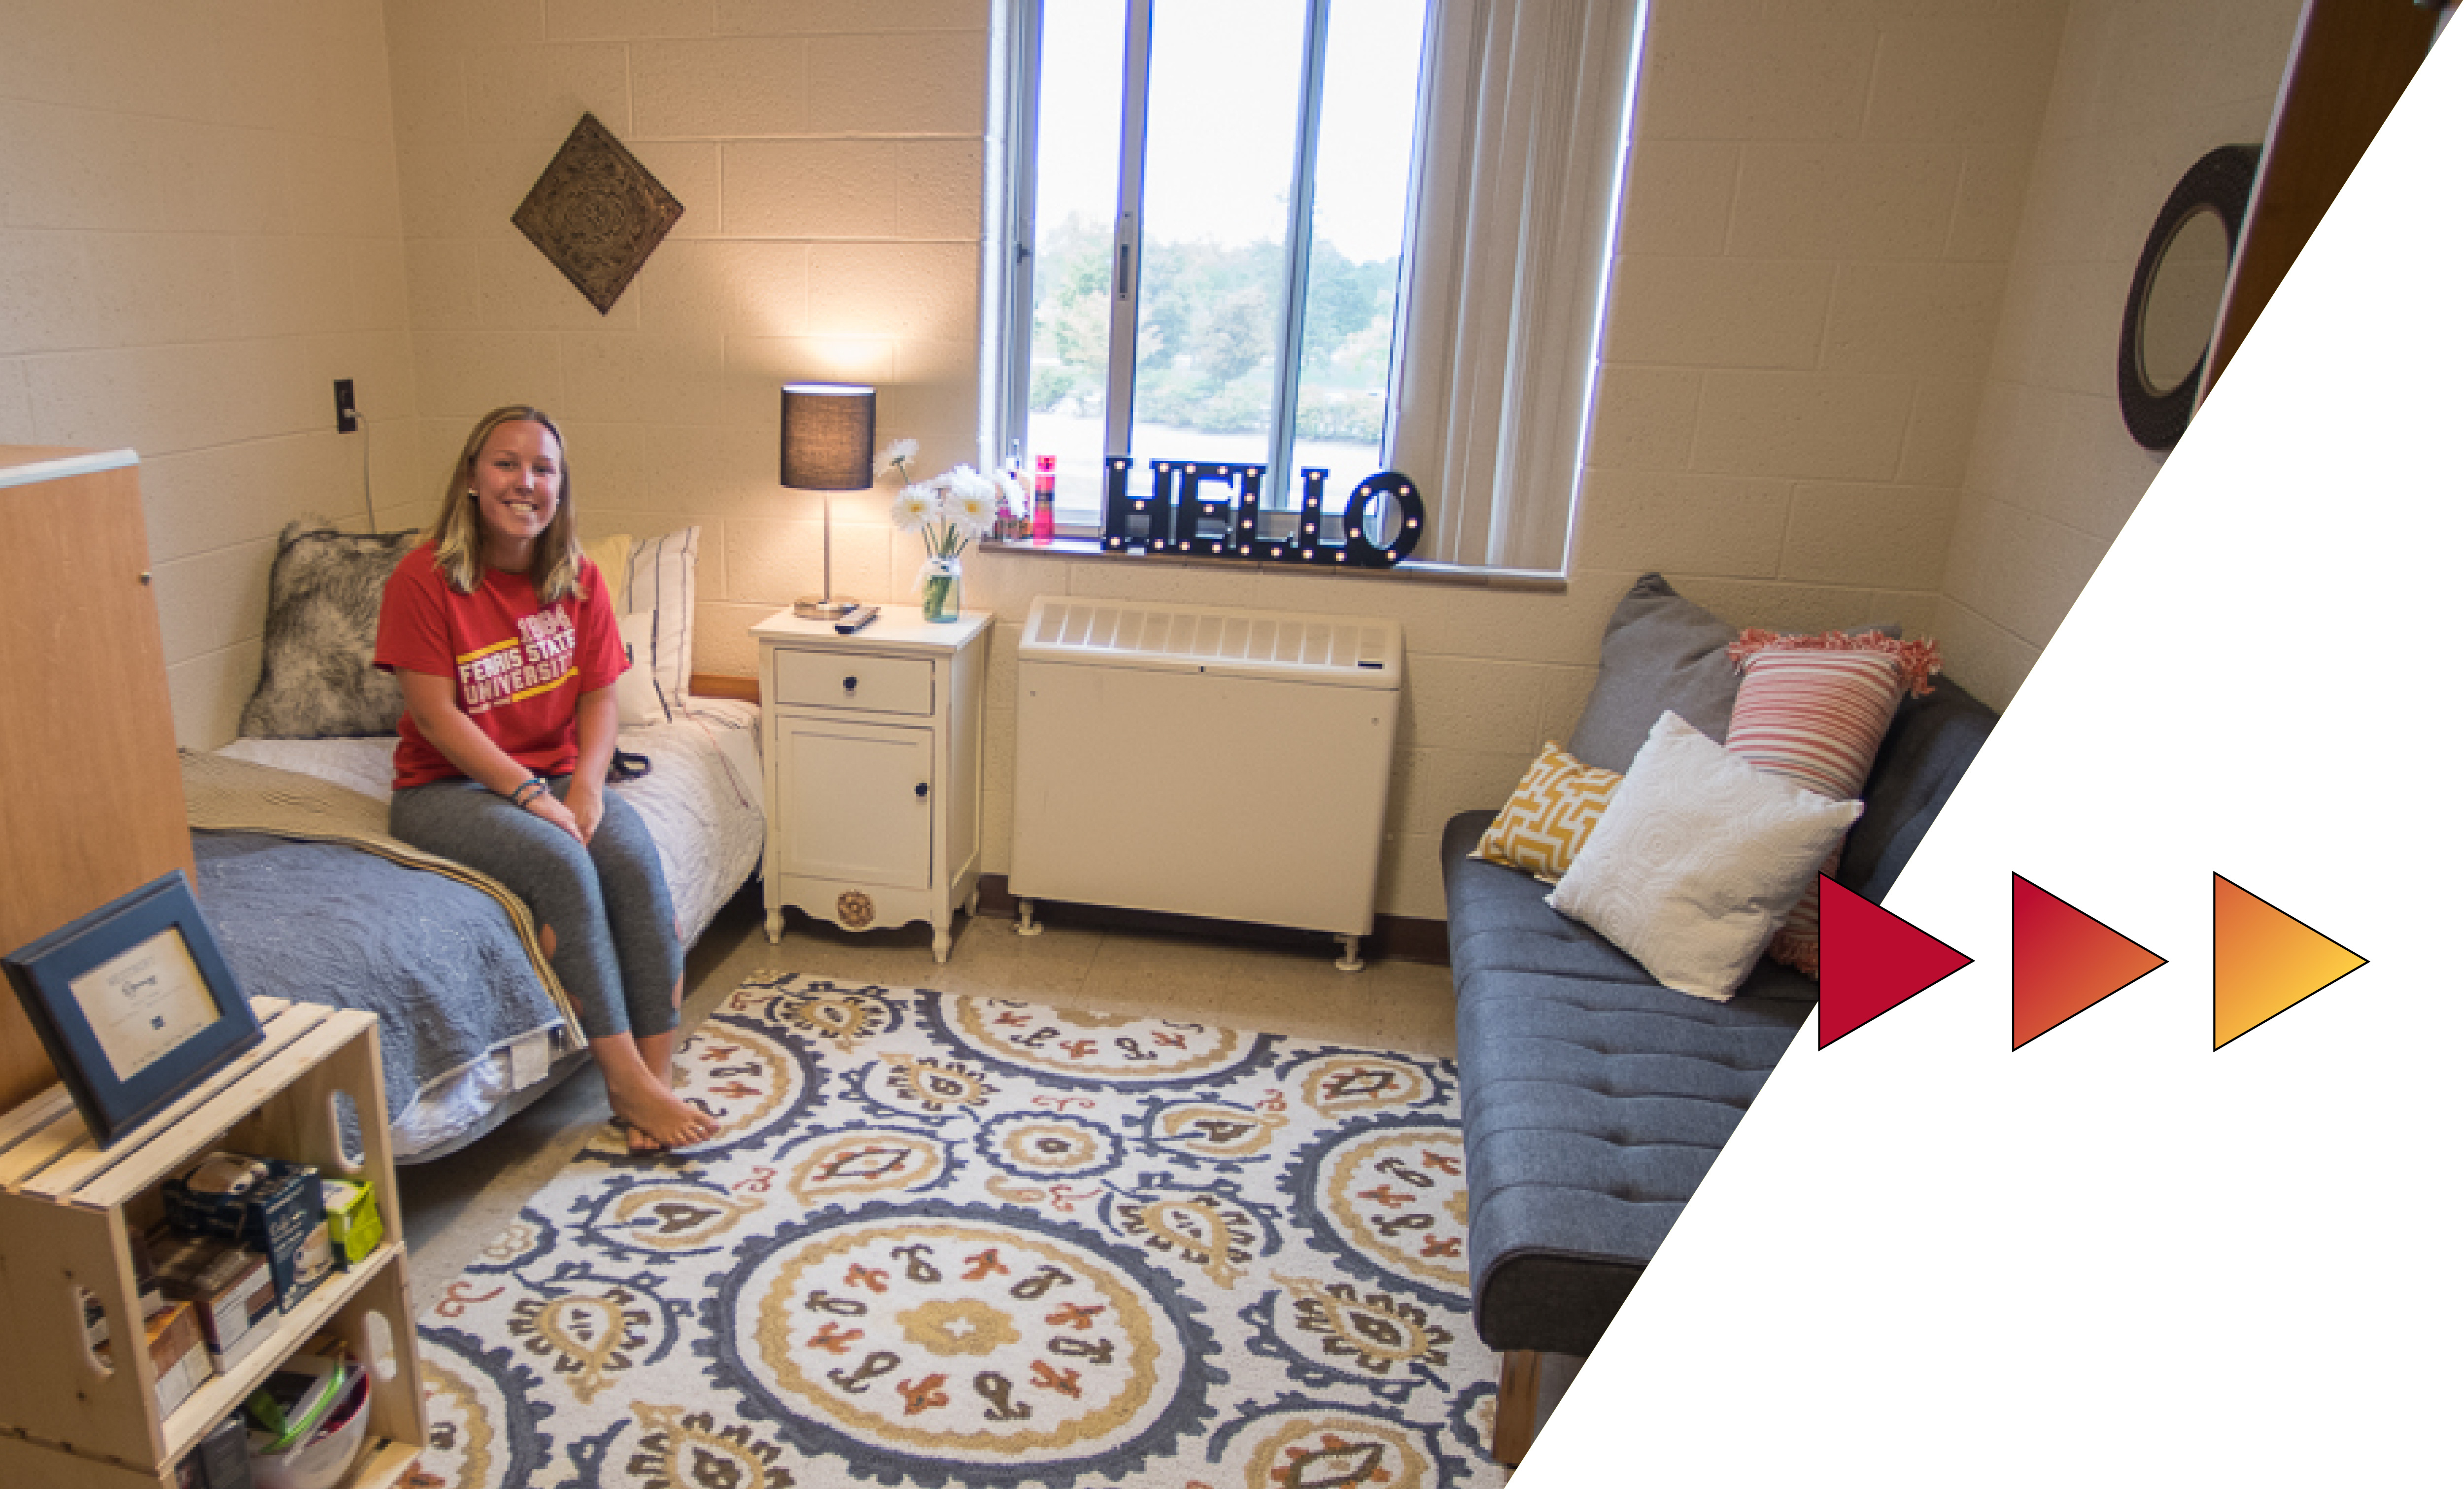 Students in their dorm at Ferris State University